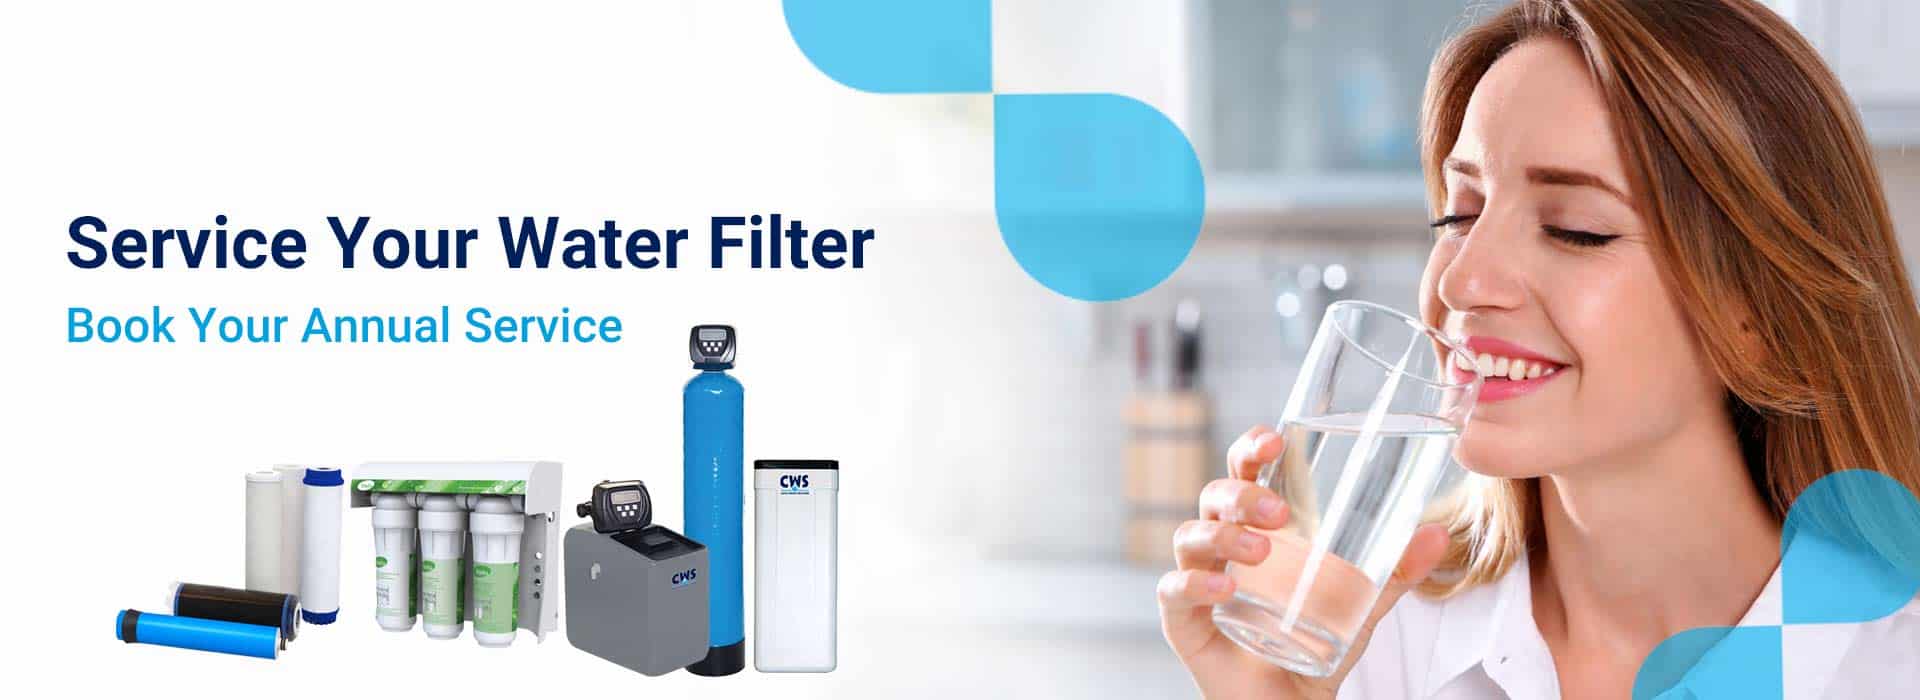 service-your-water-filter-banner